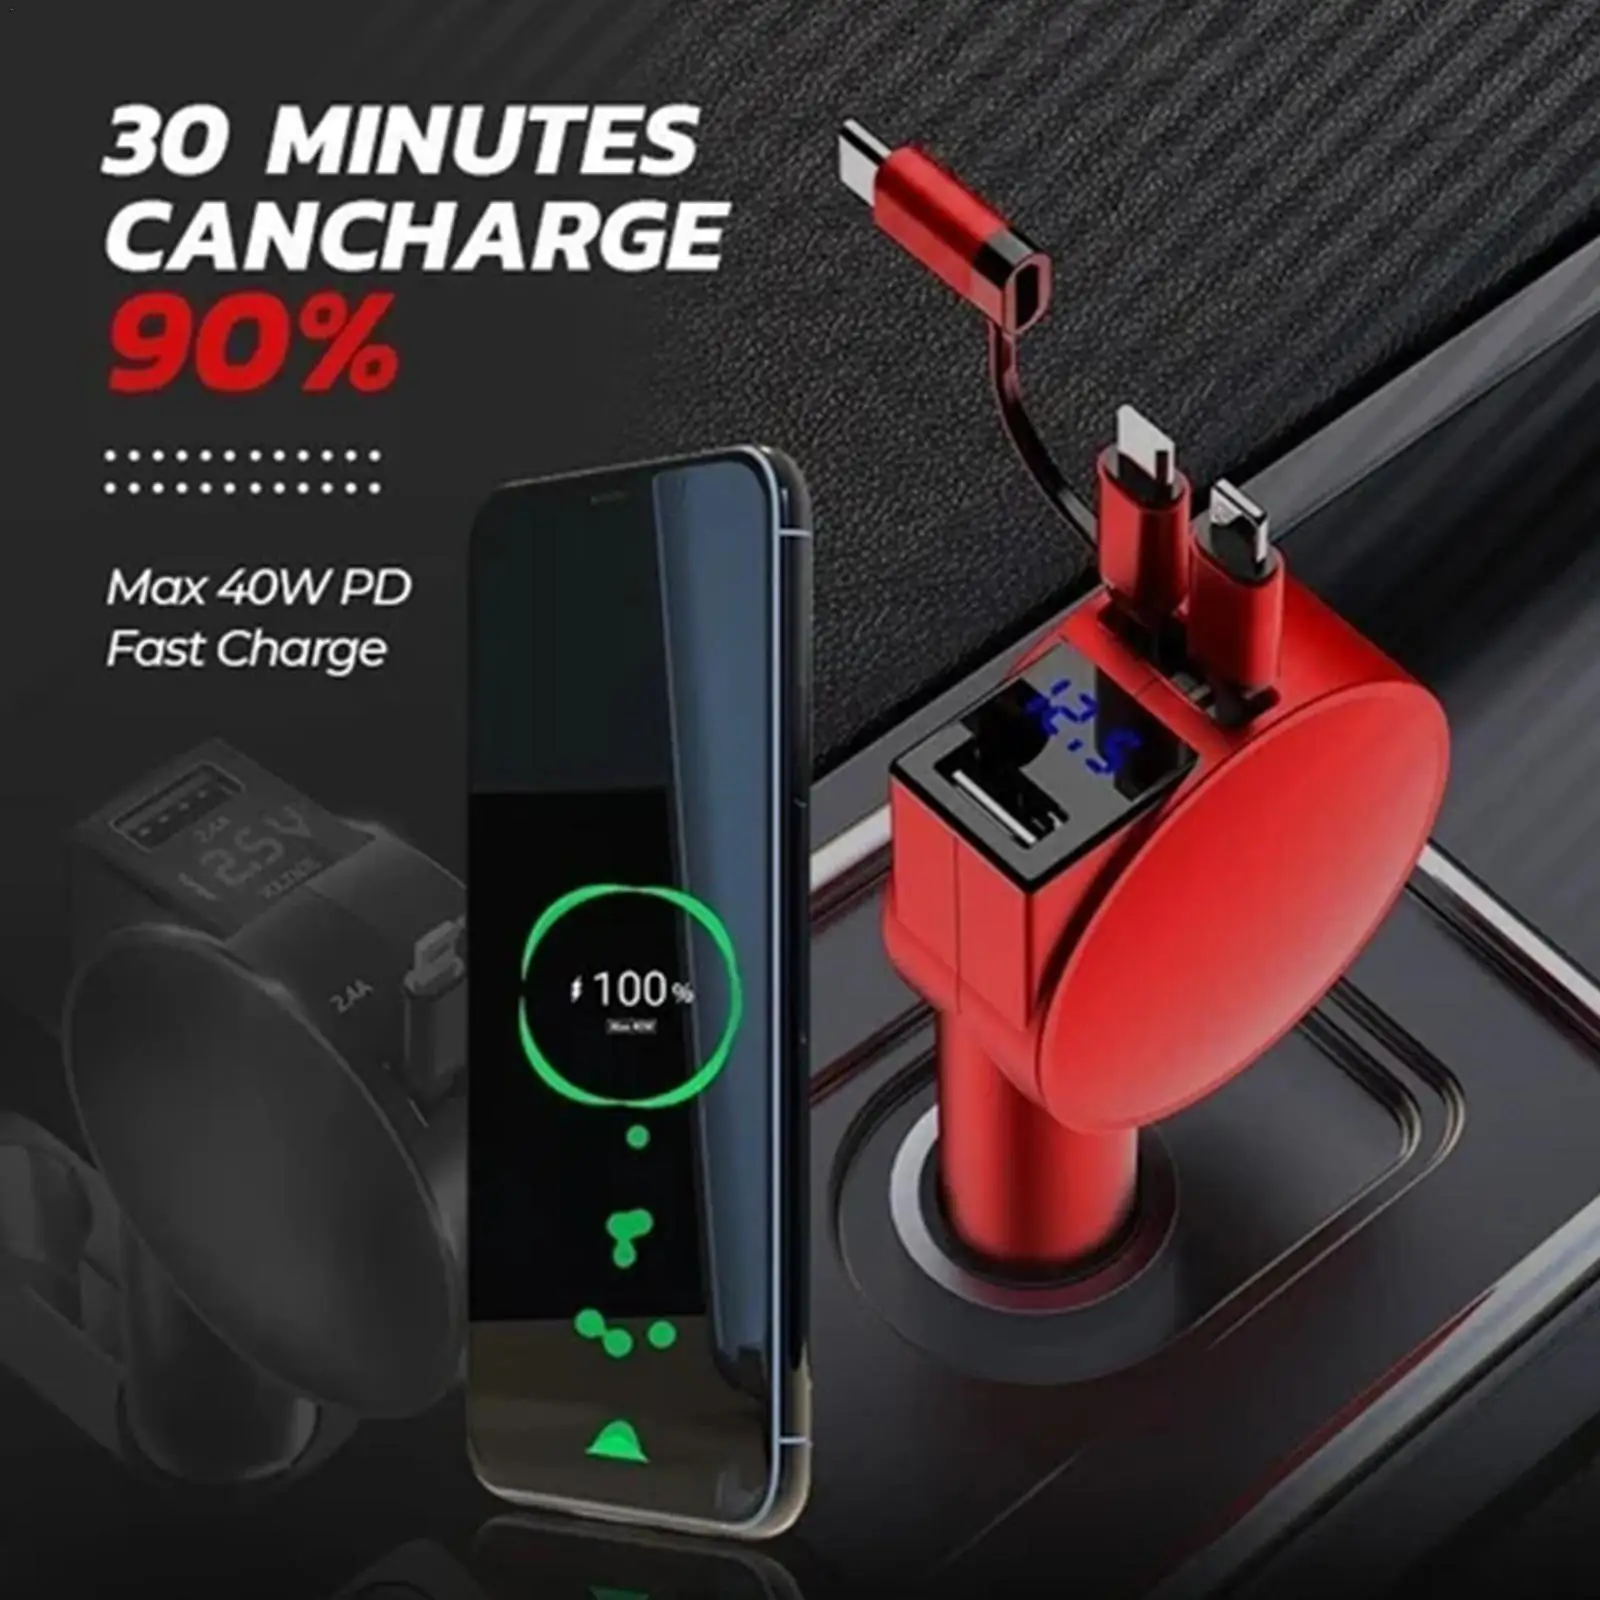 

3-in-1 Retractable Fast Charging Car Adapter Car Charger Car USB Socket QC4.0+PD Fast Charge For iPhone Android Type-C Phones